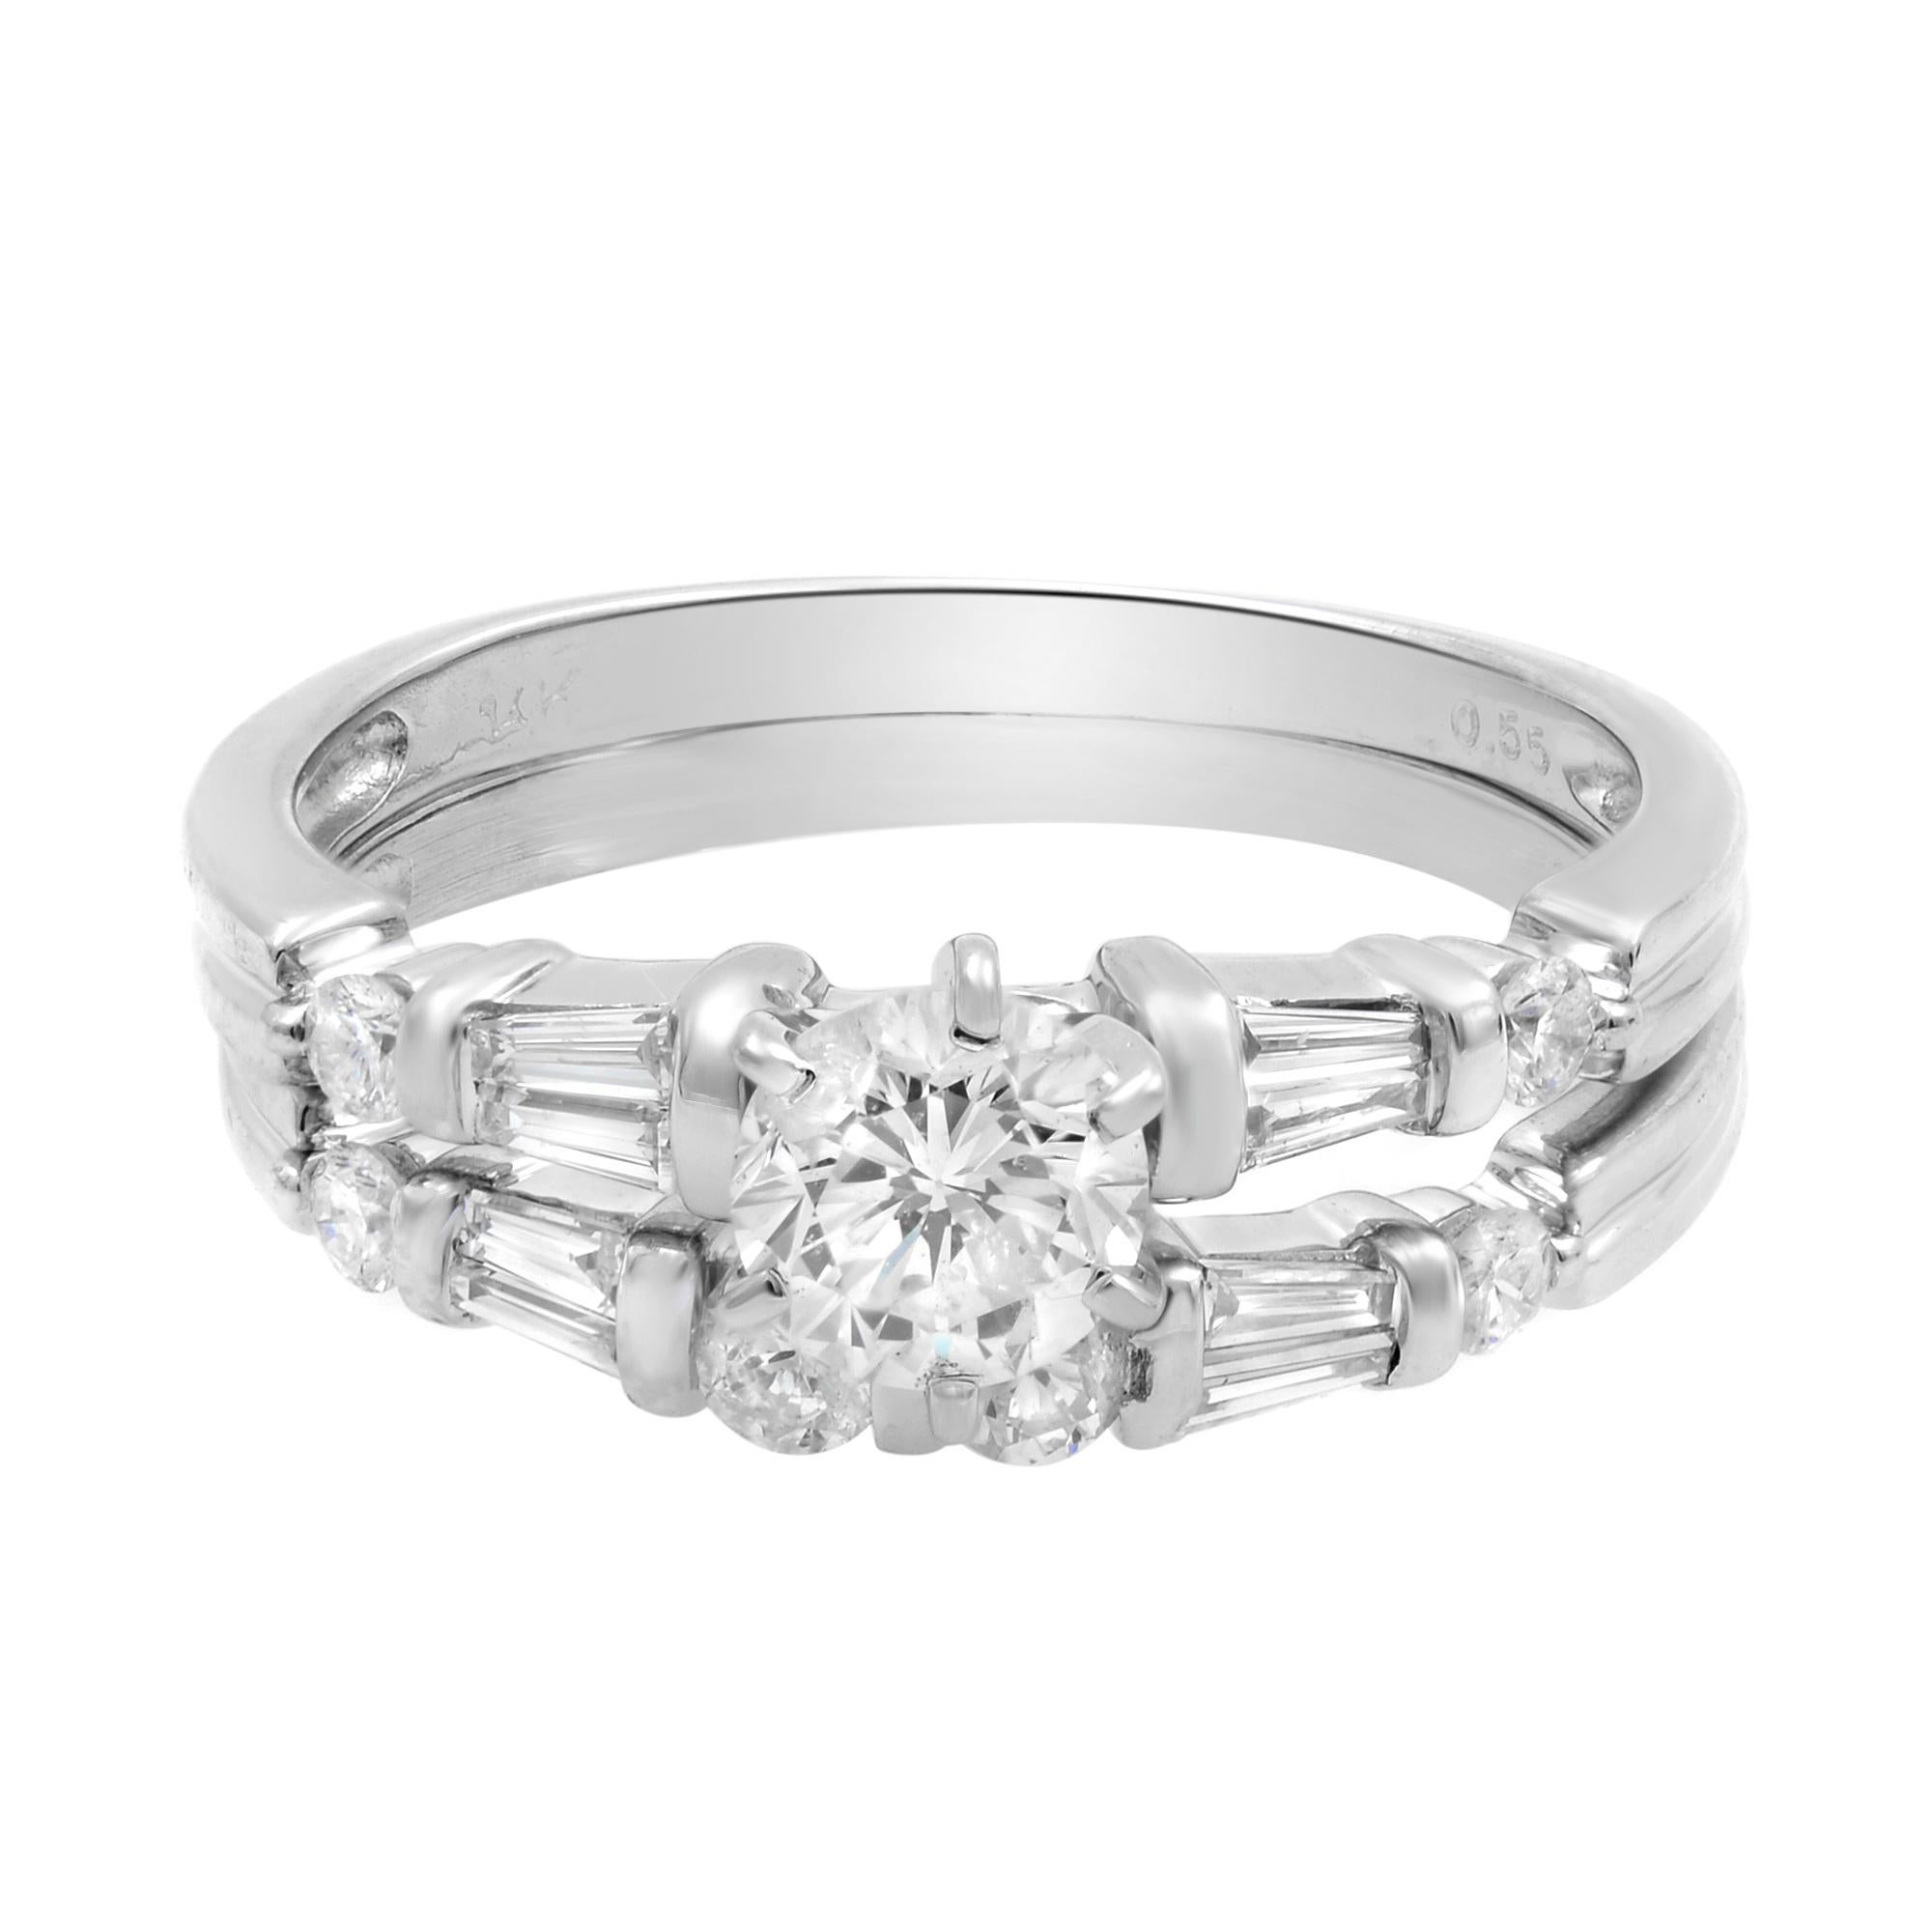 This beautiful bridal ring set is a combination of an engagement ring and a matching wedding band. Simple and chic, this bridal set is a beautiful reminder of your timeless love. Set in high polished 14k white gold, the classic engagement ring is